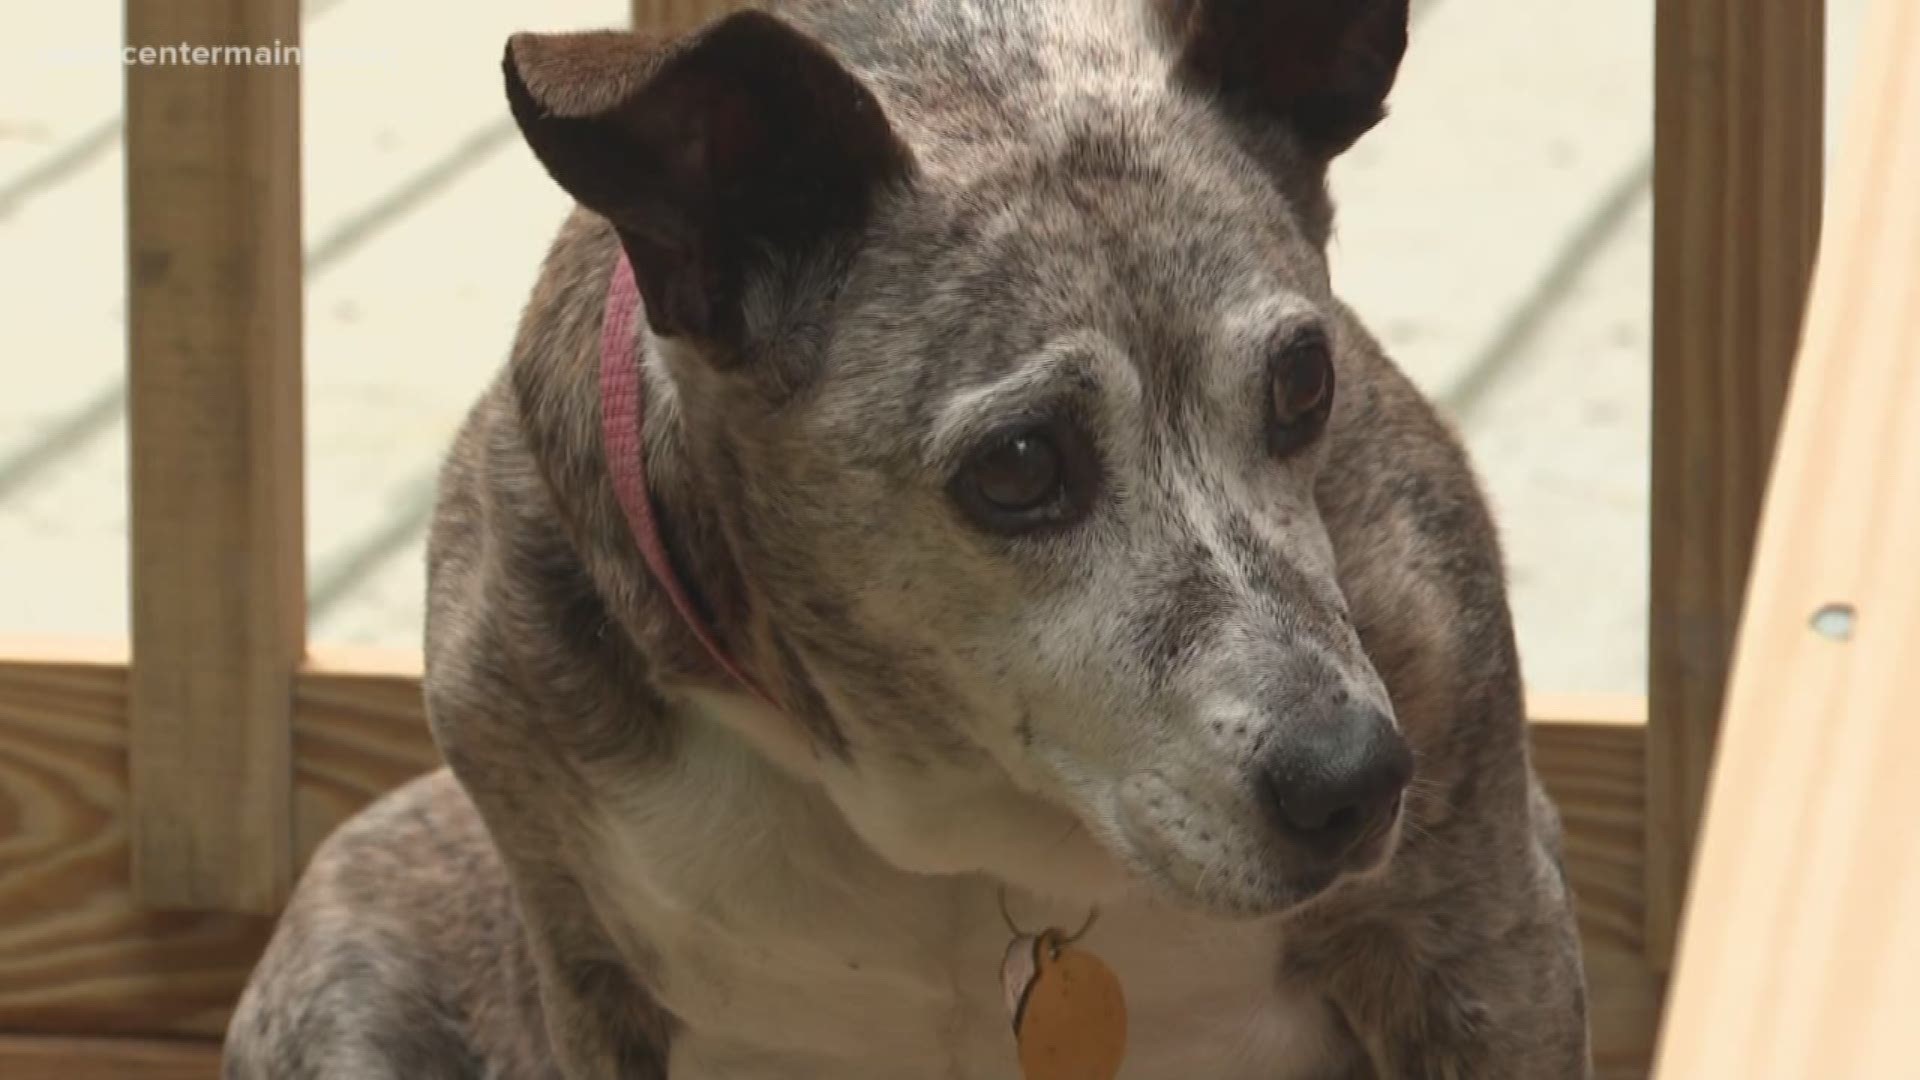 A North Yarmouth woman is opening her home to senior dogs.